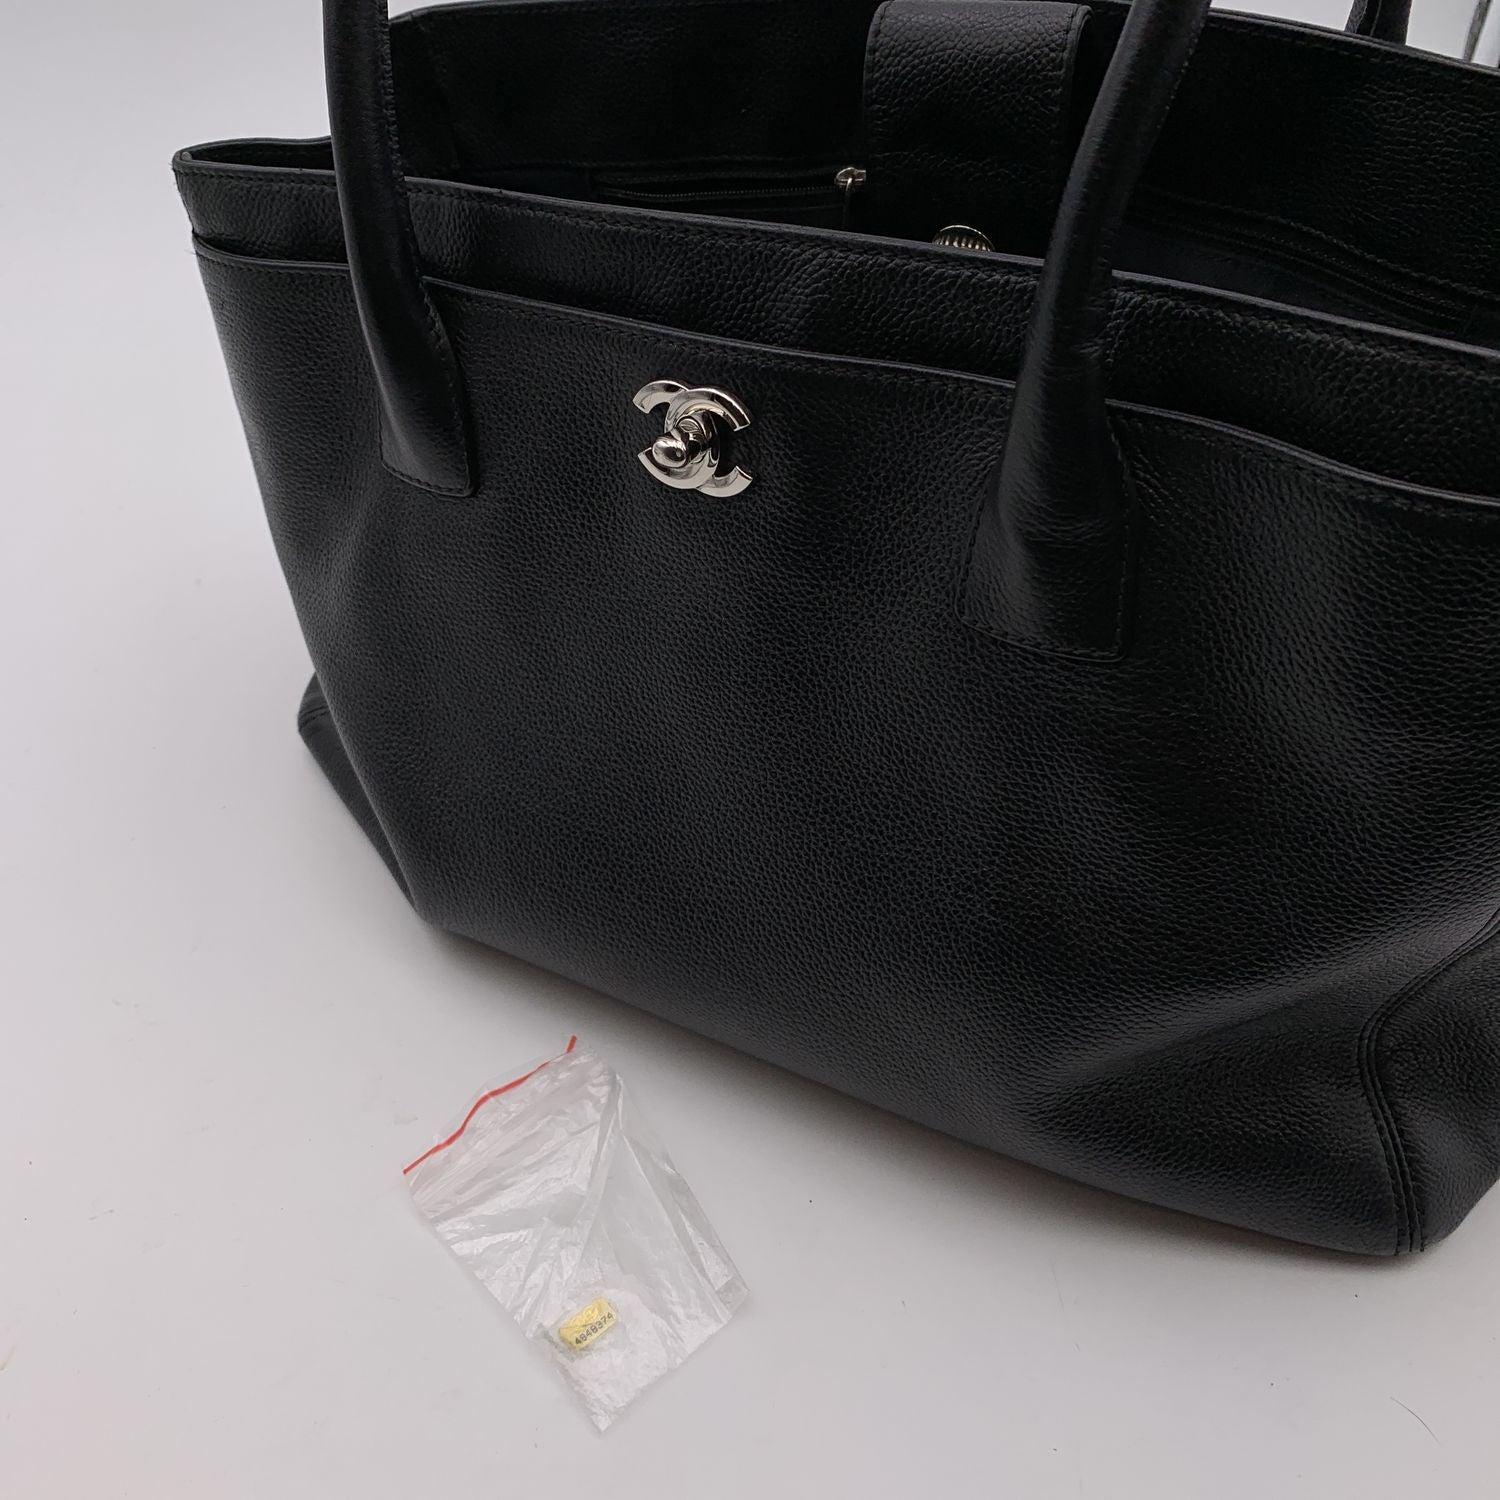 Chanel 2010s Black Pebbled Leather Executive Tote Bag with Strap For Sale 1